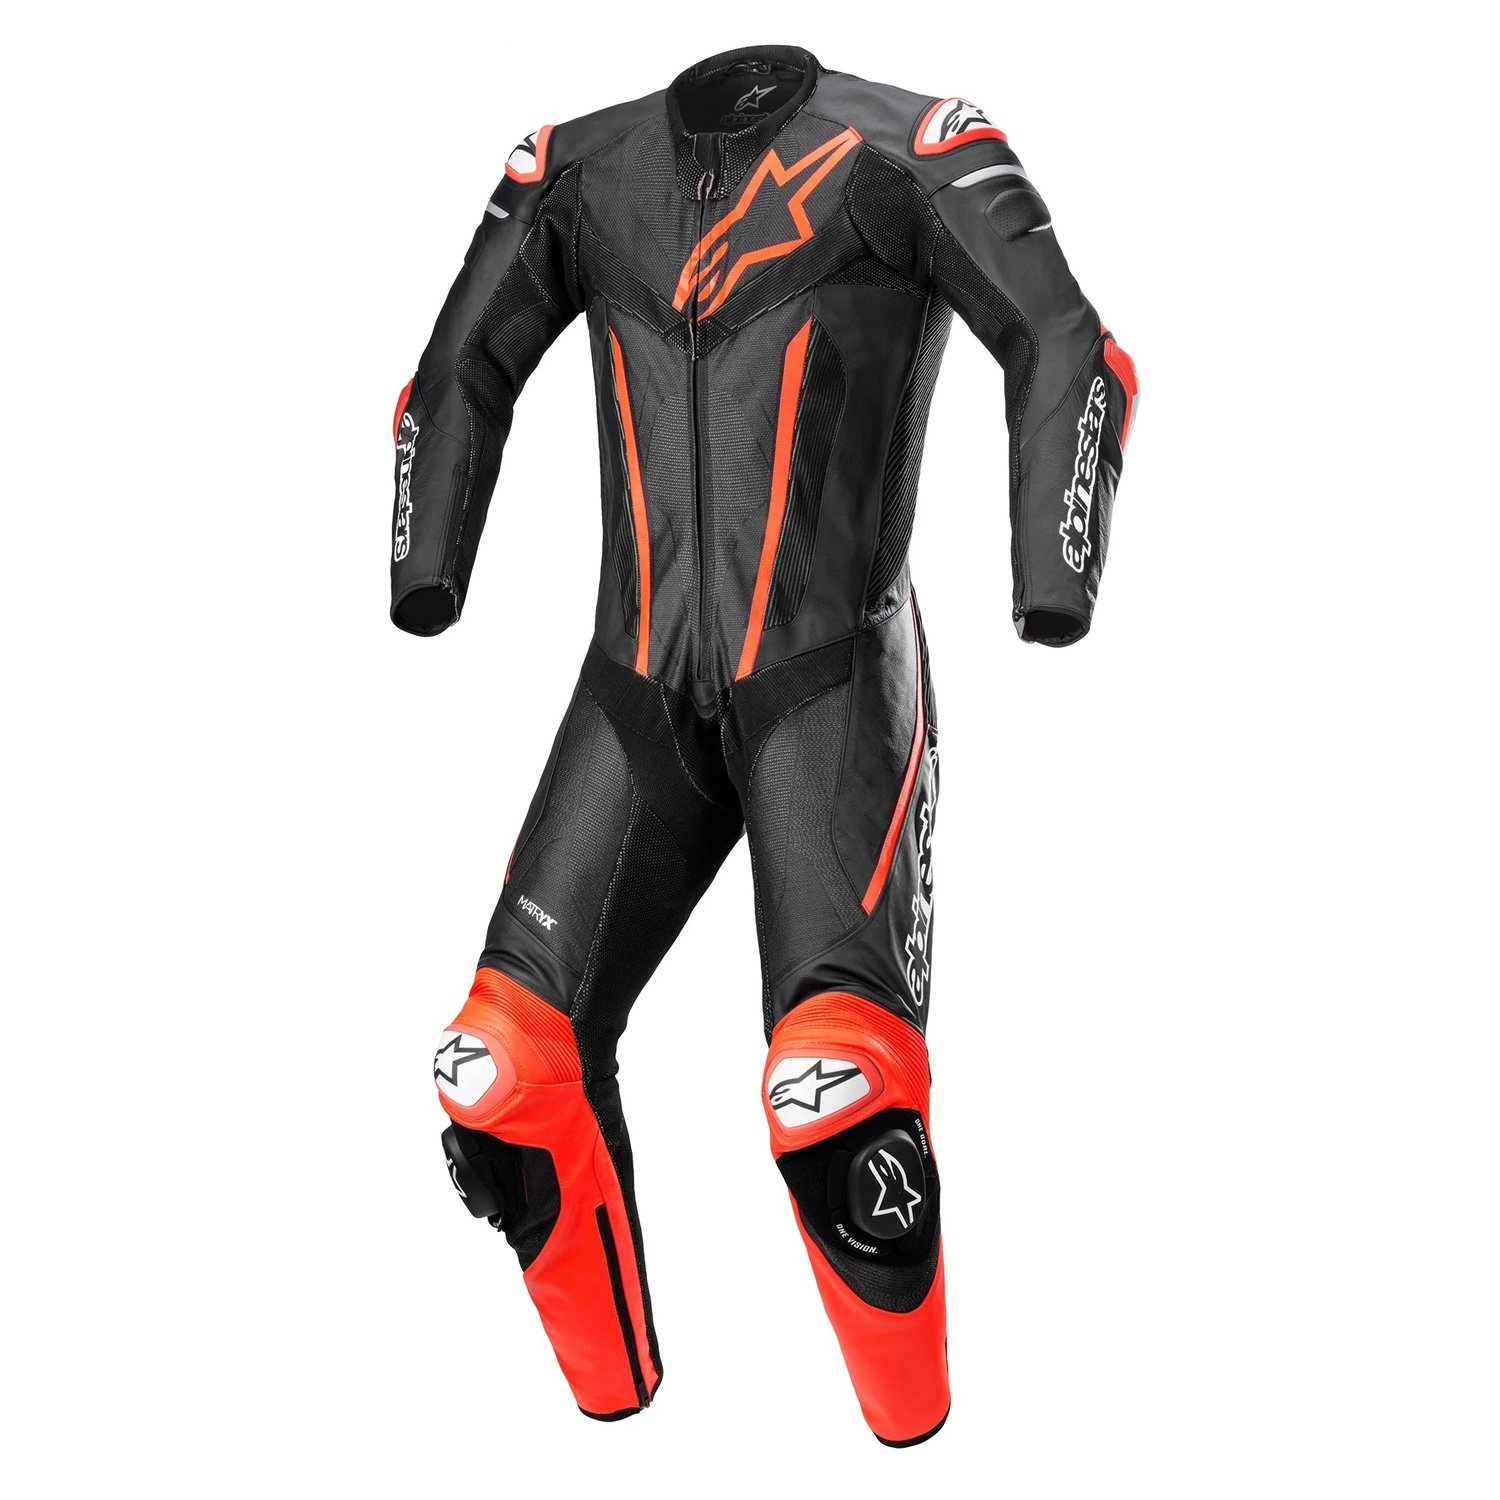 Image of Alpinestars Fusion Leather One Piece Suit Black Red Fluo Size 54 ID 8059175907357